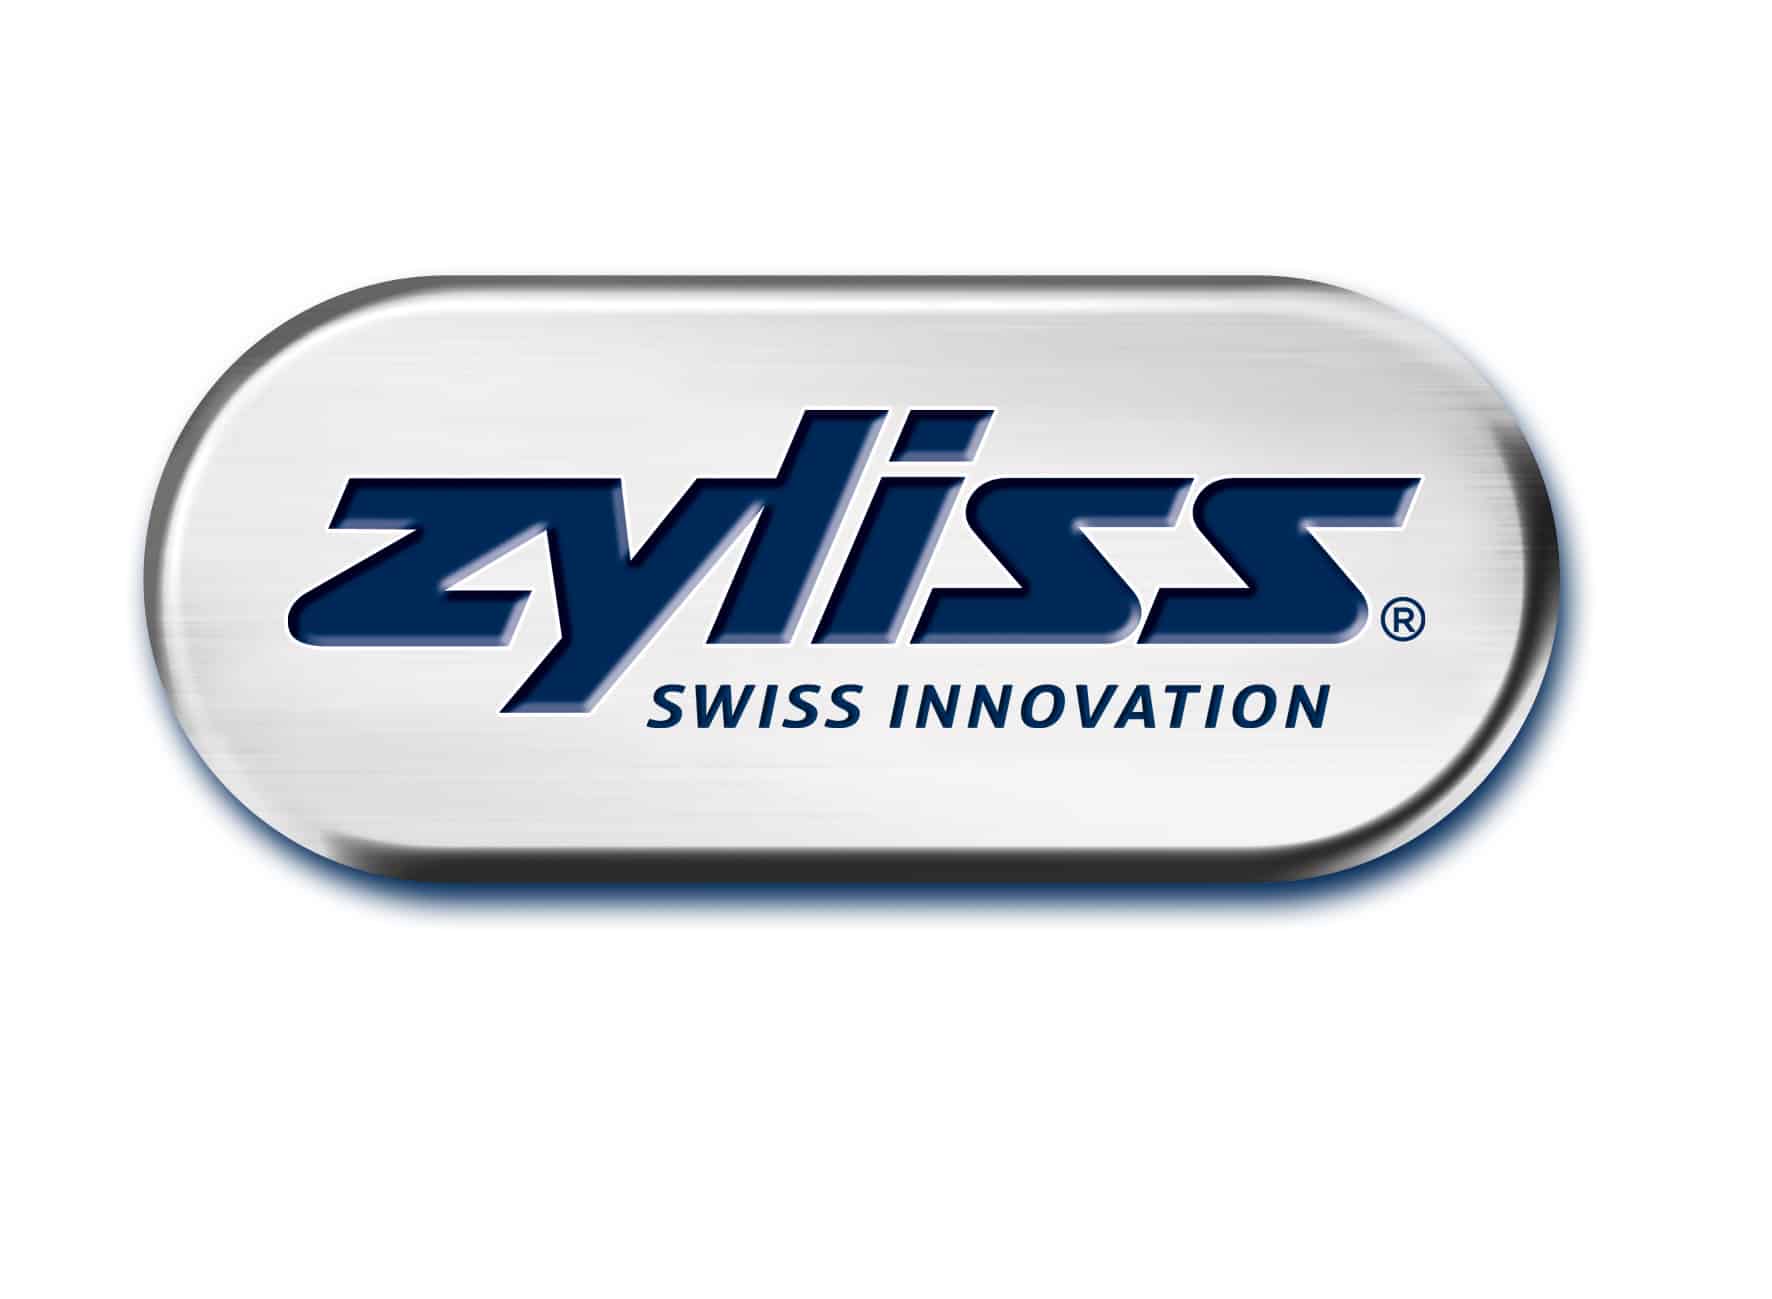 Zyliss Logo - Best Zyliss Christmas Gifts Like No One Else